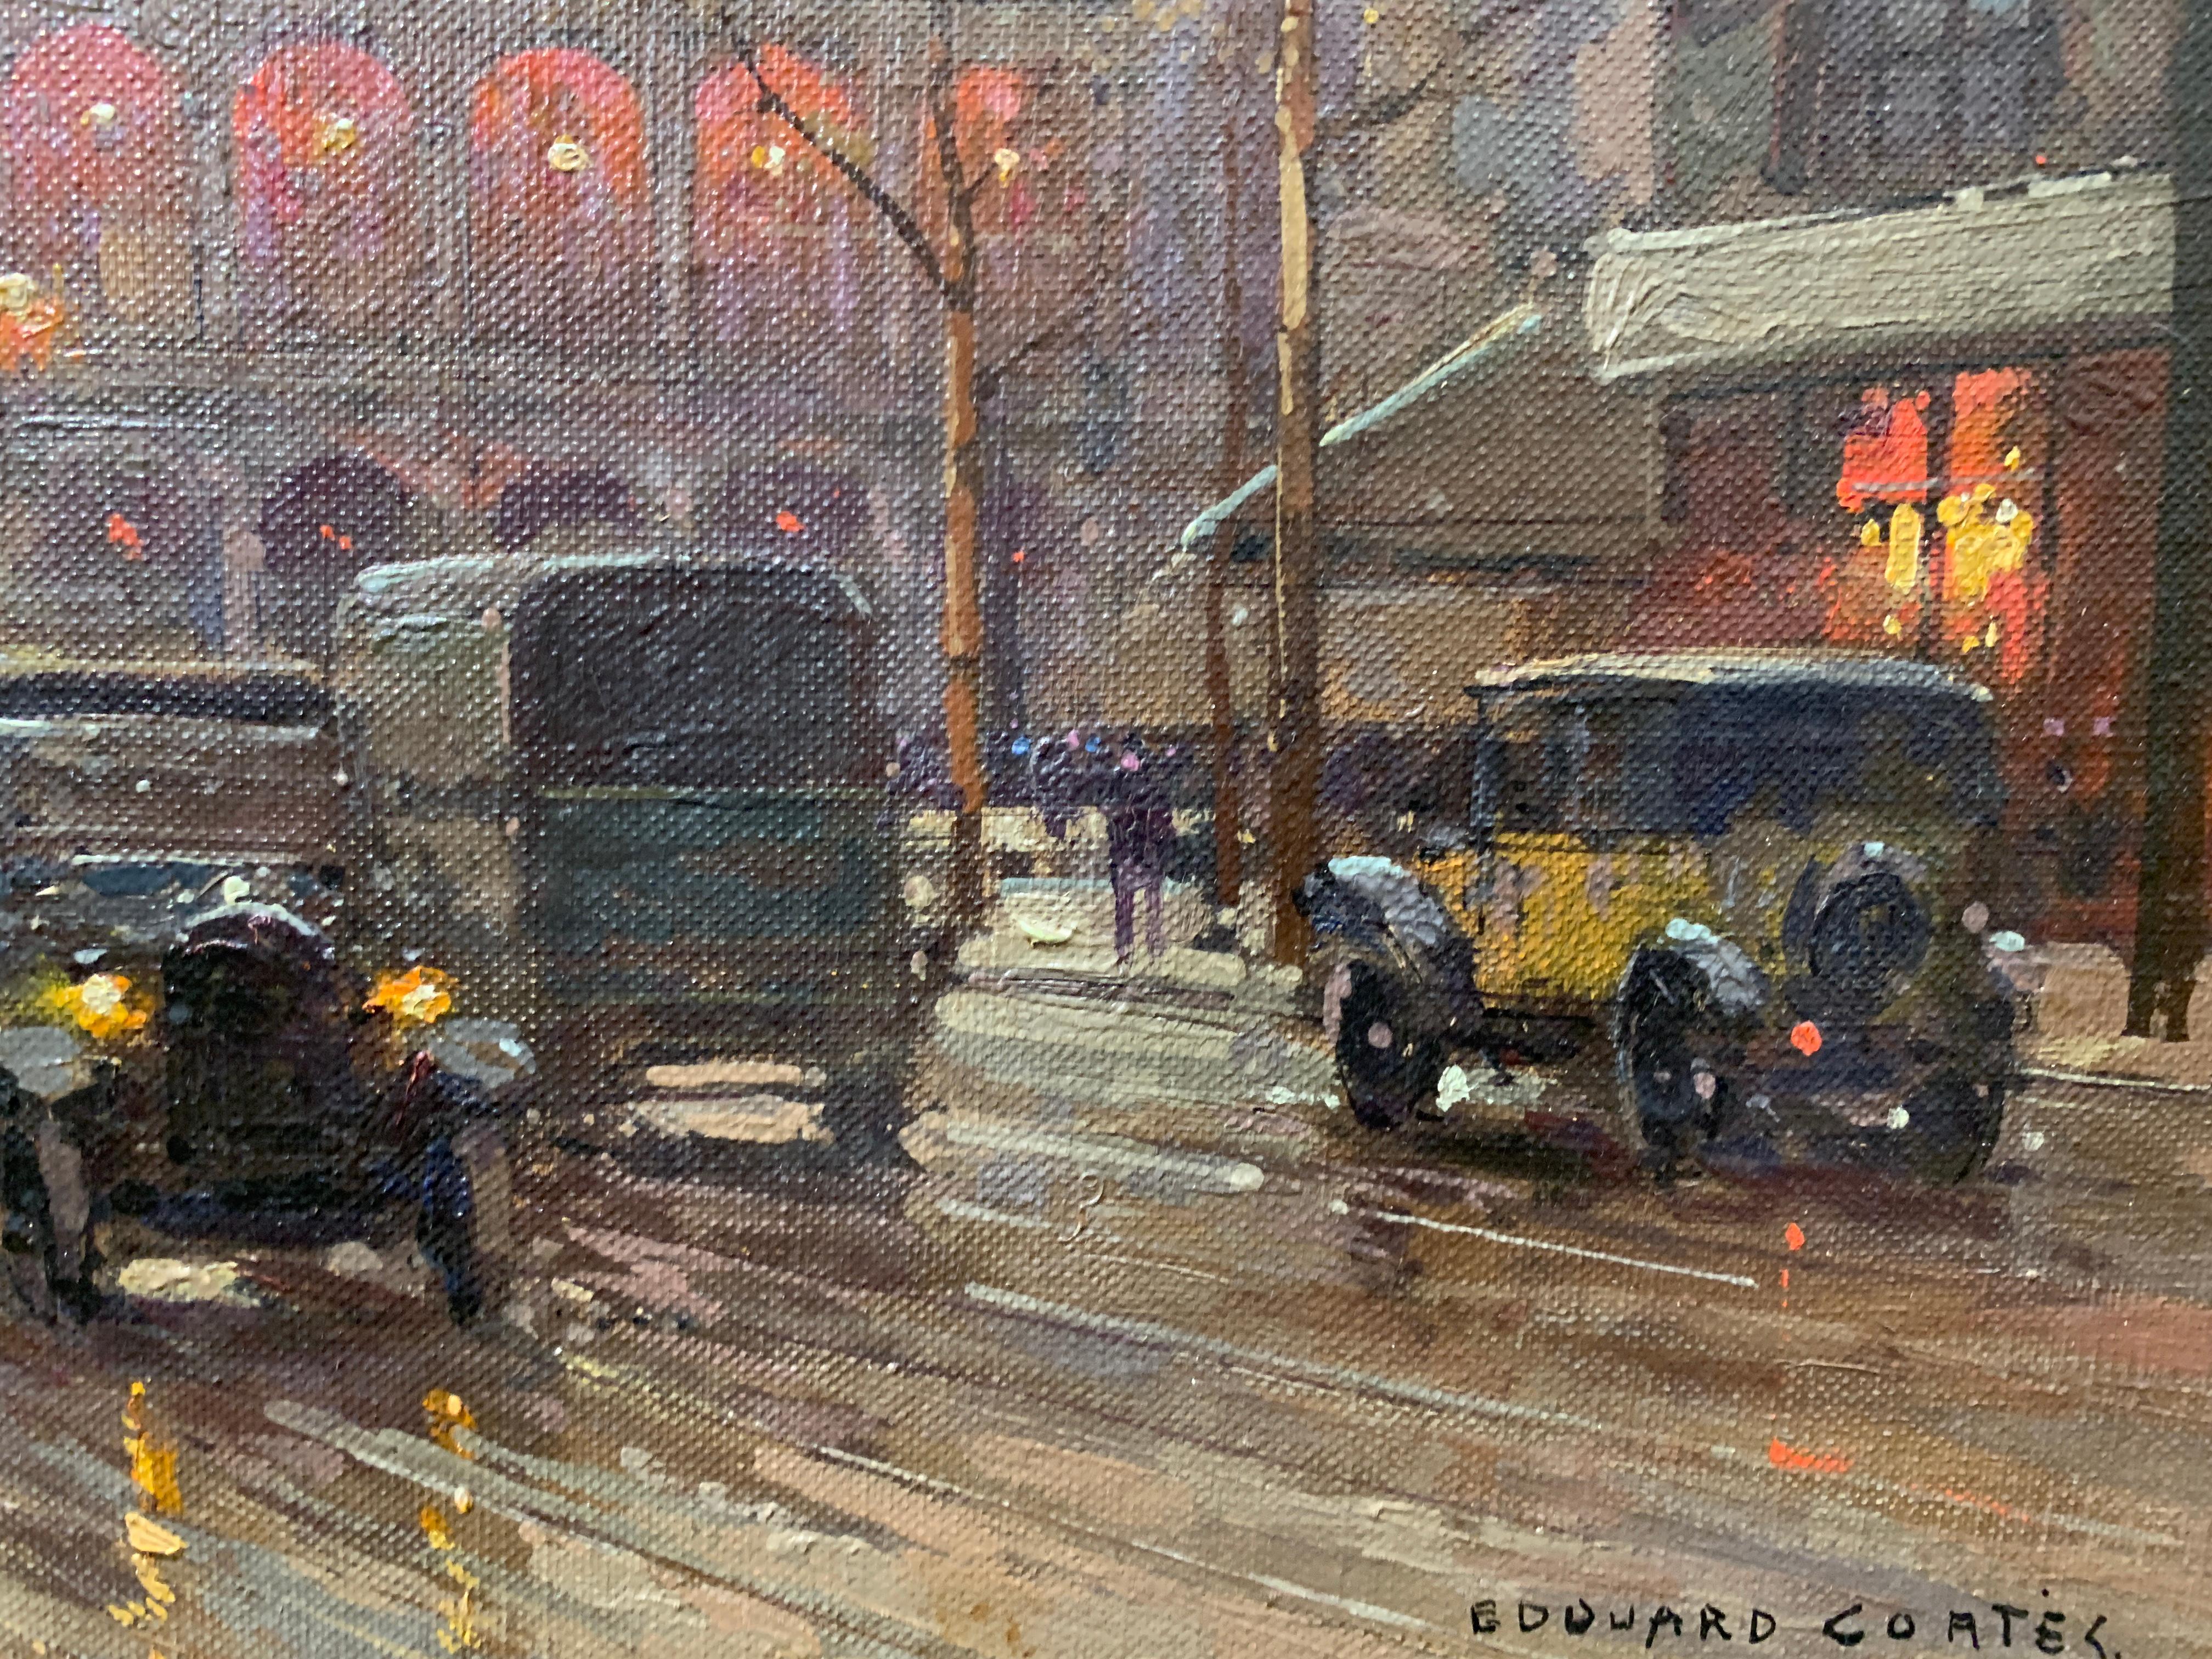 Theatre de Sara Bernhart et Place de Chatelet by Edouard Cortes was painted circa 1935-40 and signed lower right. It is an oil on canvas measuring 13x18. The piece is included in the Catalogue Raisonne - The complete works of Cortes and includes the